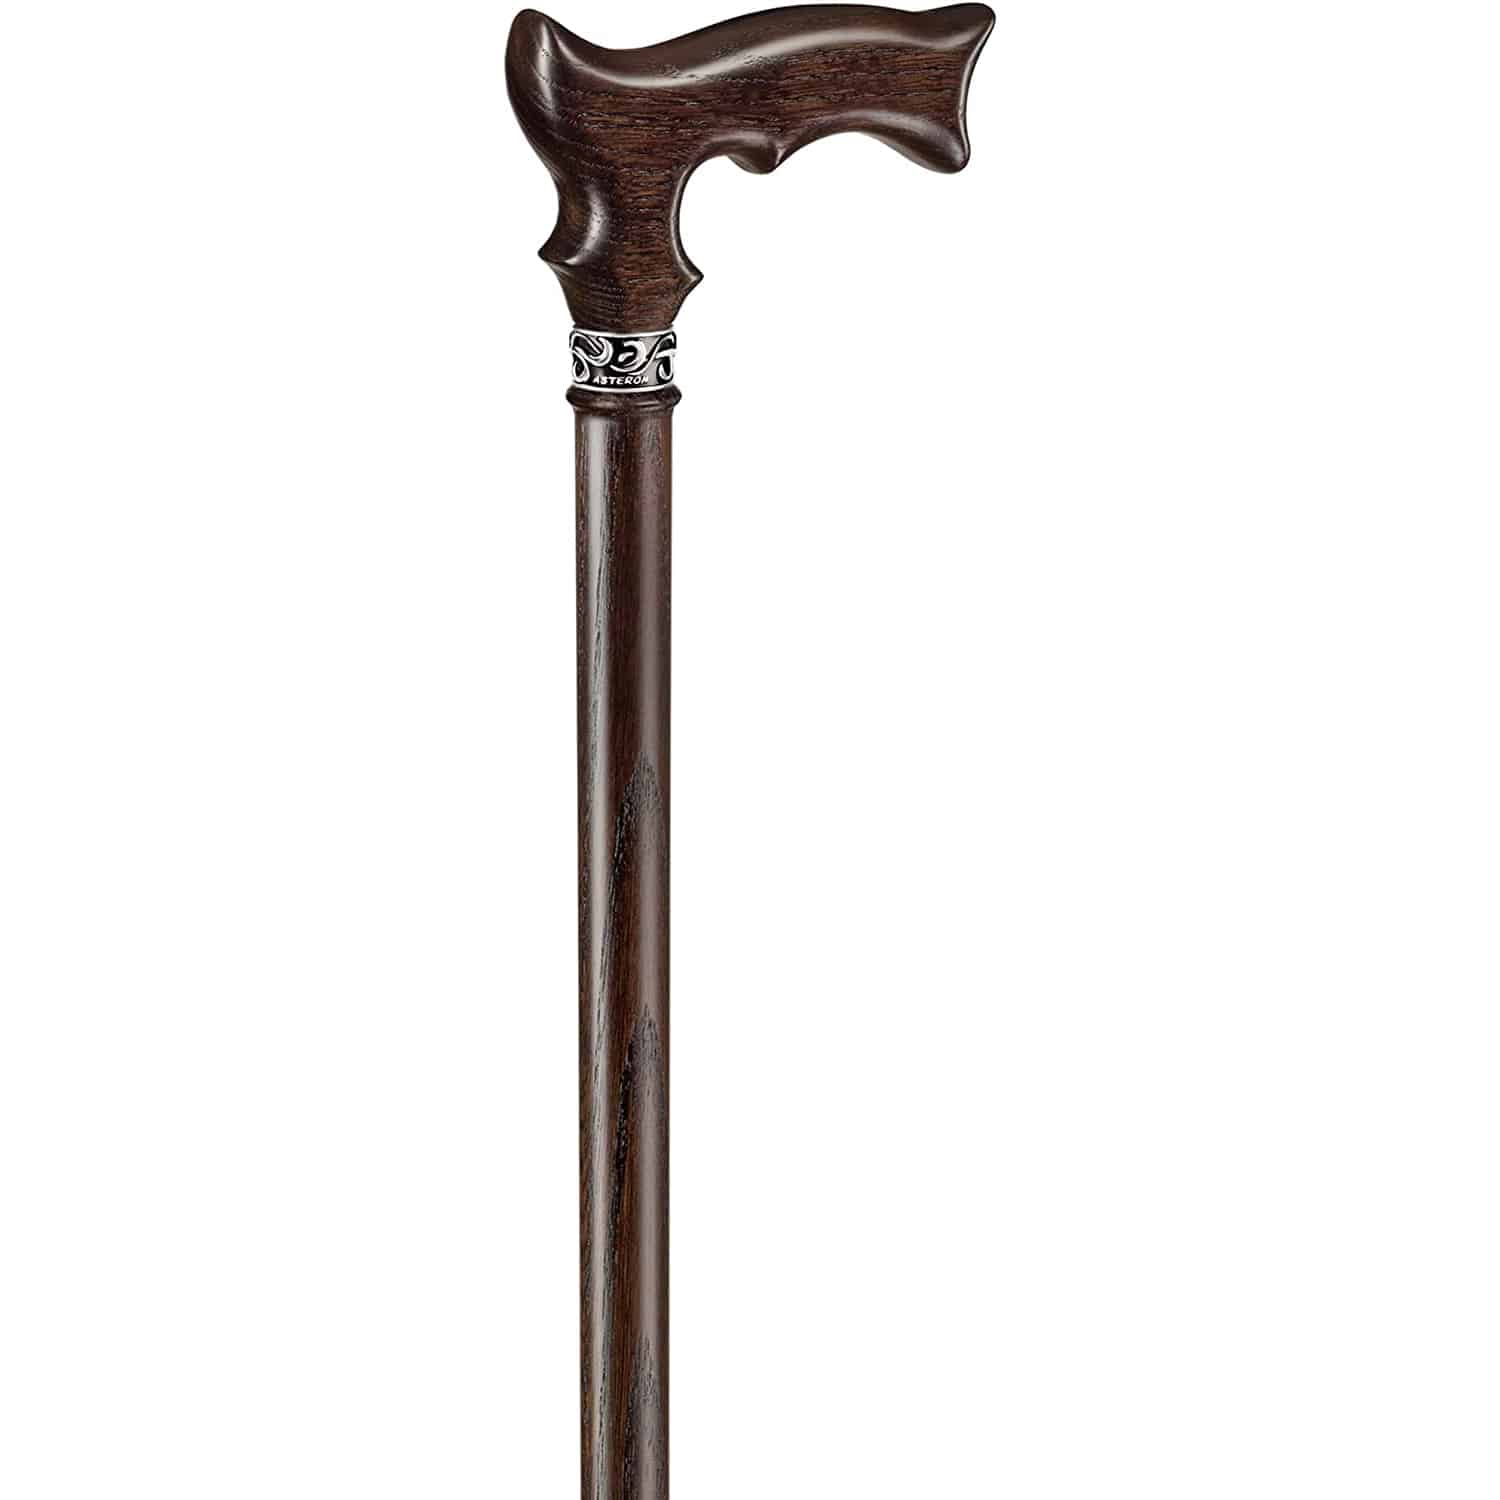 Renaissance Walking Cane for Gentlemen and Ladies Handcrafted of